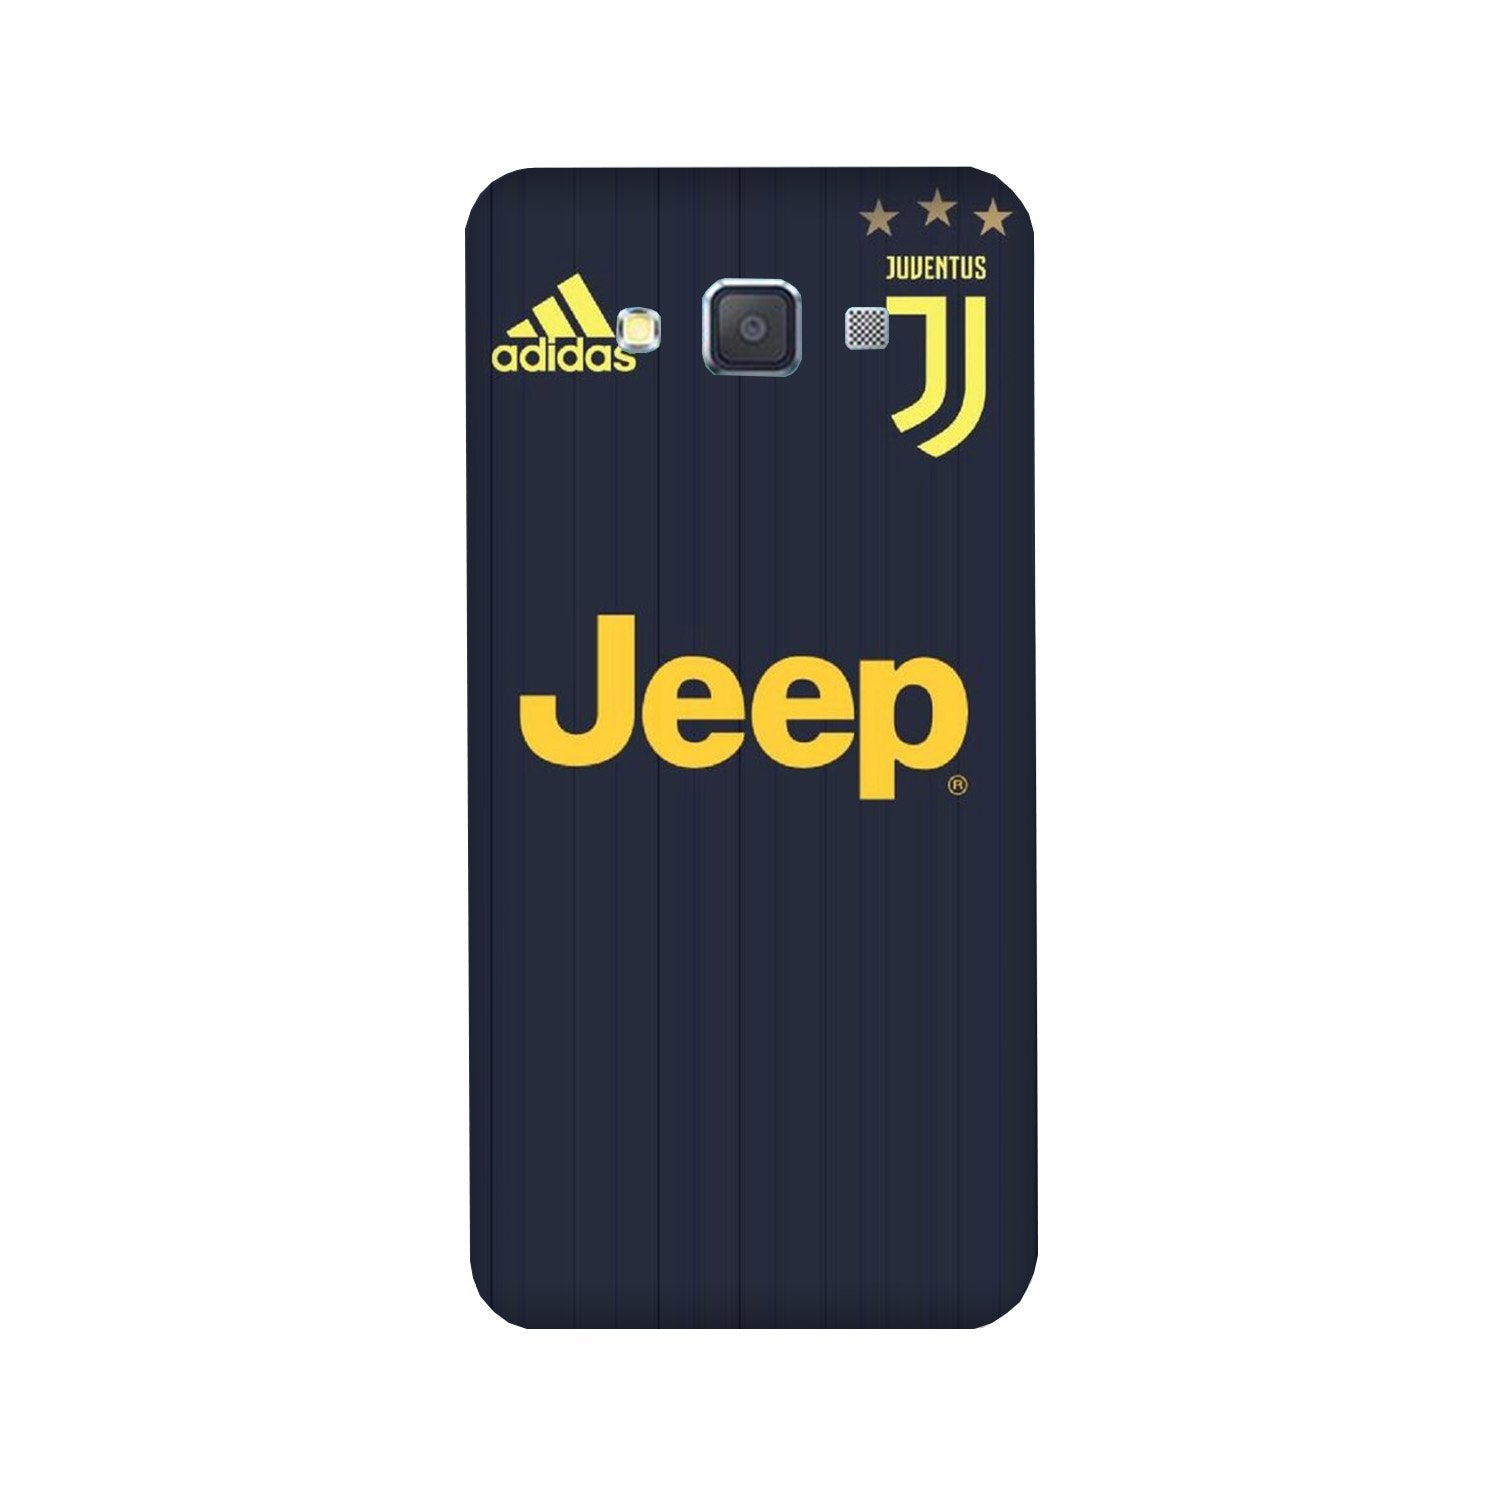 Jeep Juventus Case for Galaxy ON7/ON7 Pro(Design - 161)